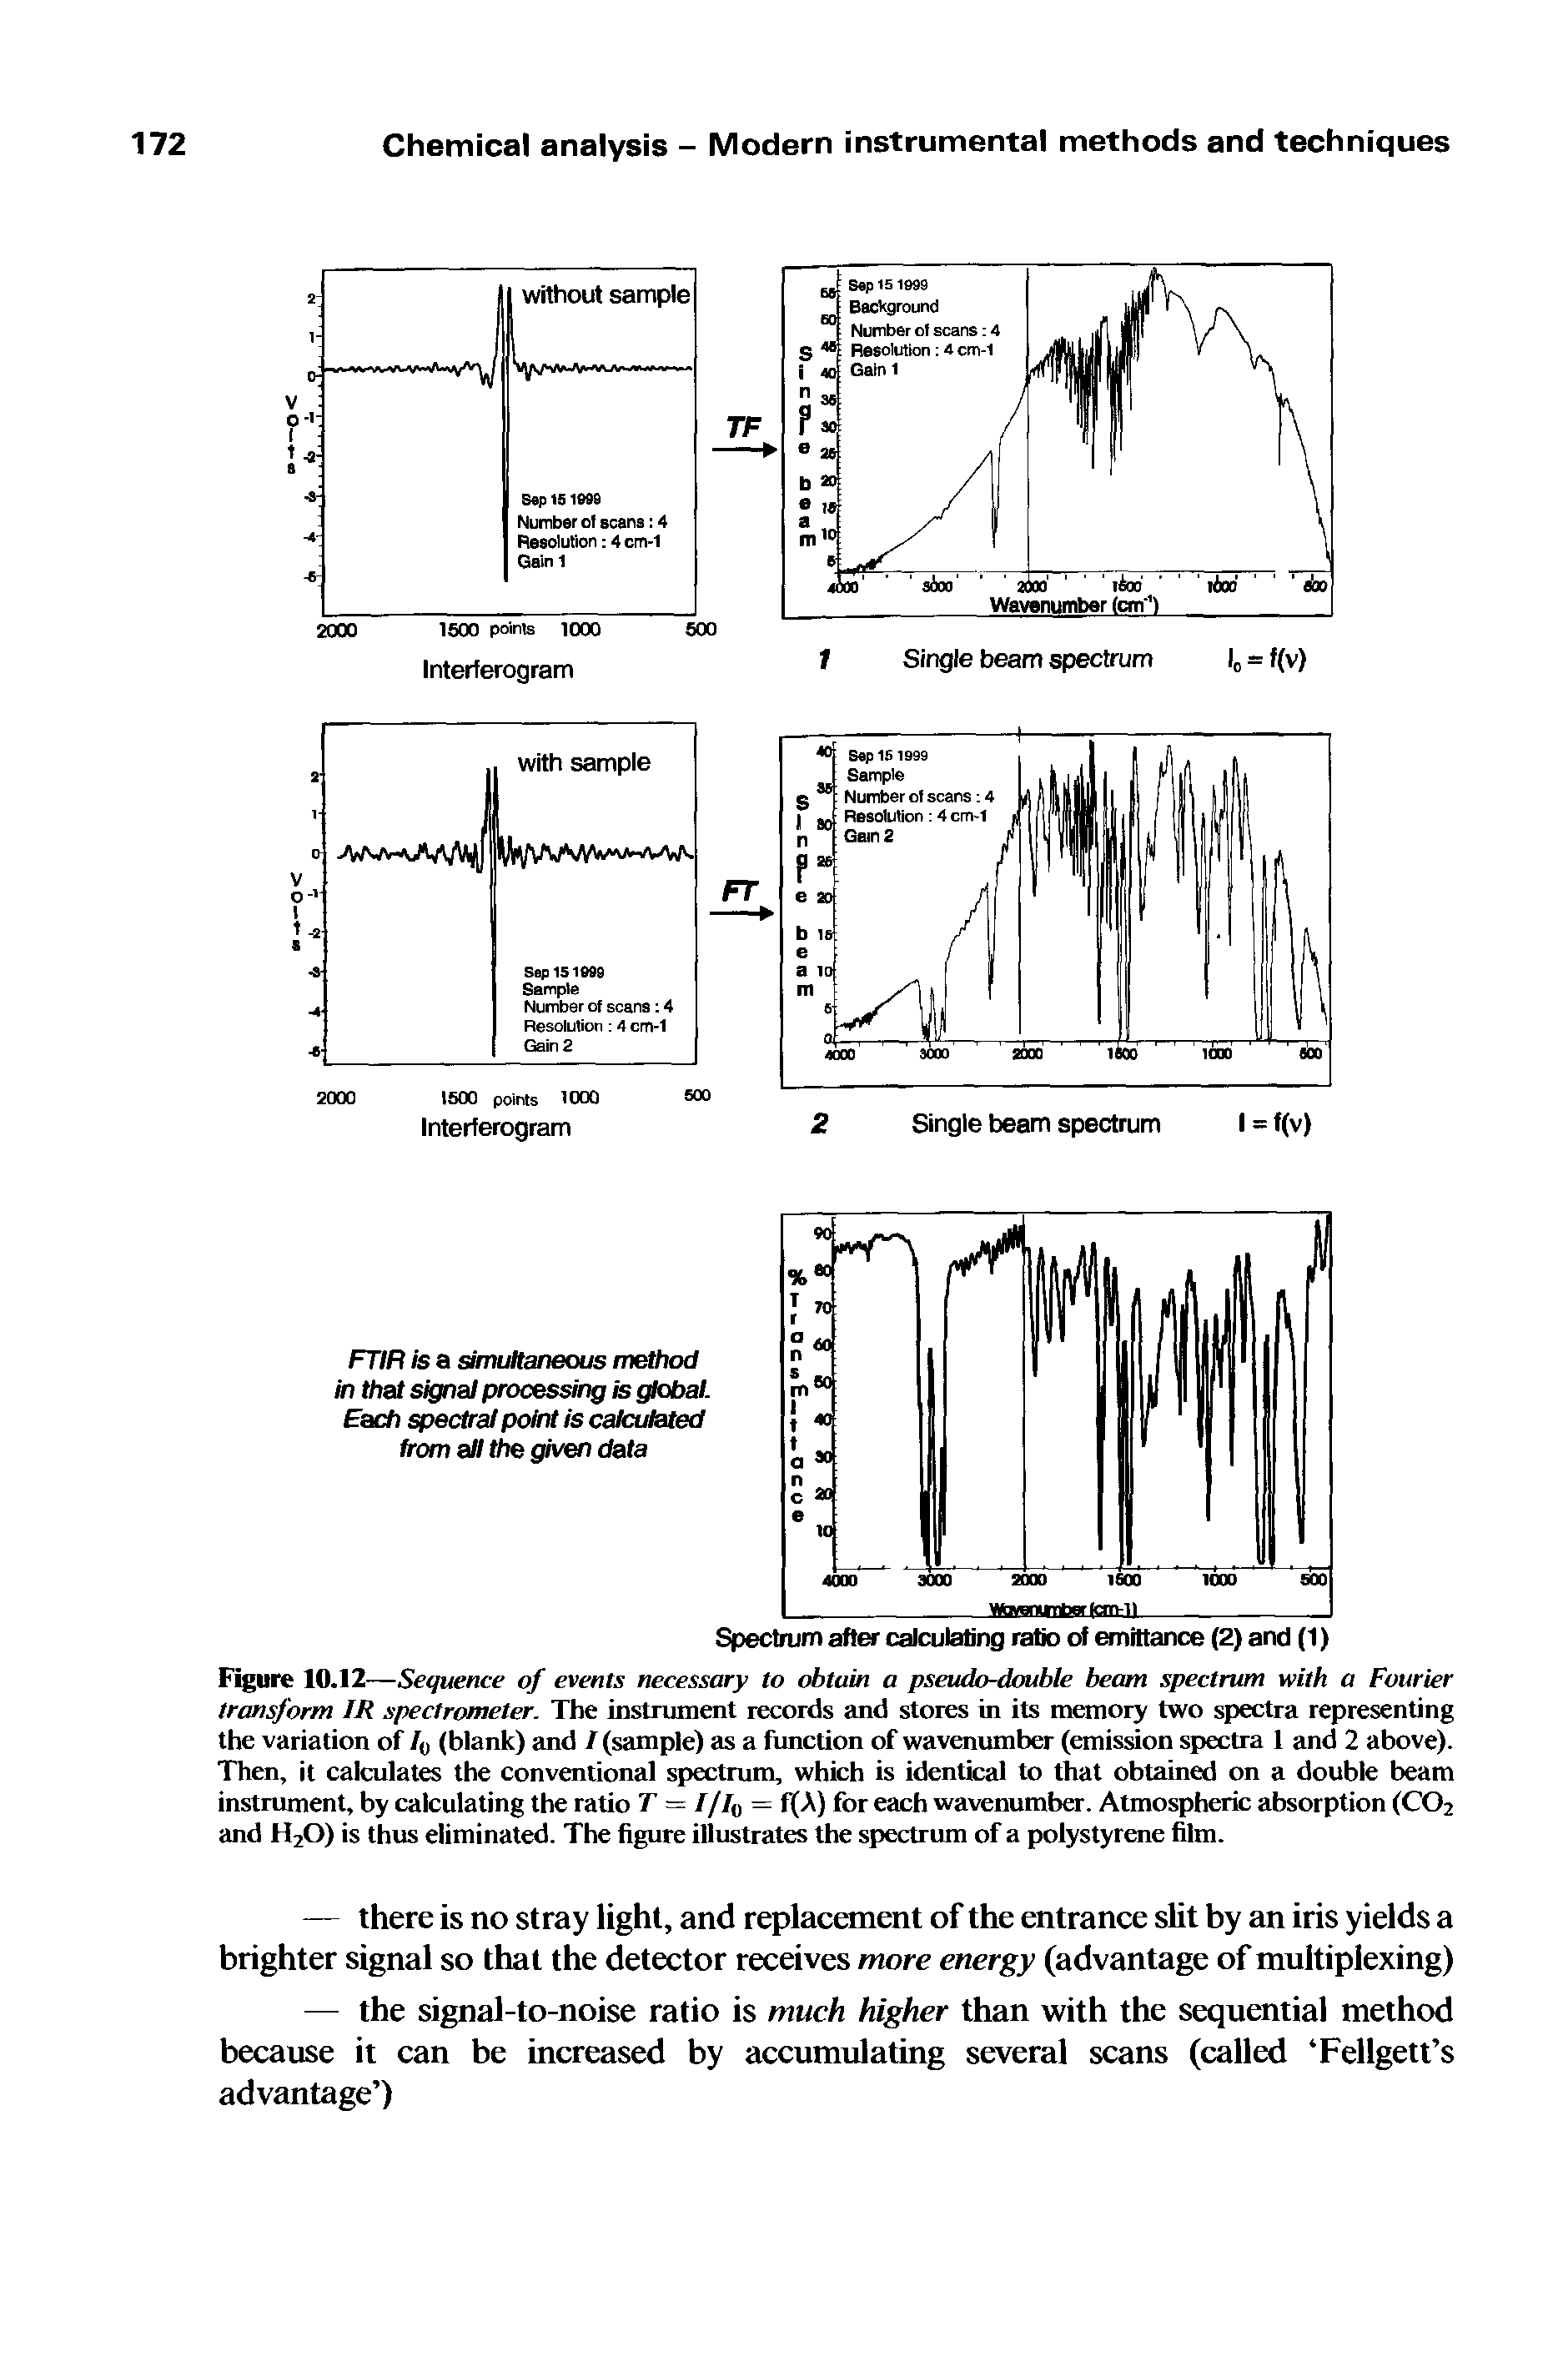 Figure 10.12—Sequence of events necessary to obtain a pseudo-double beam spectrum with a Fourier transform IR spectrometer. The instrument records and stores in its memory two spectra representing the variation of lu (blank) and / (sample) as a function of wavenumber (emission spectra 1 and 2 above). Then, it calculates the conventional spectrum, which is identical to that obtained on a double beam instrument, by calculating the ratio T — /// — f(A) for each wavenumber. Atmospheric absorption (CO2 and H20) is thus eliminated. The figure illustrates the spectrum of a polystyrene film.